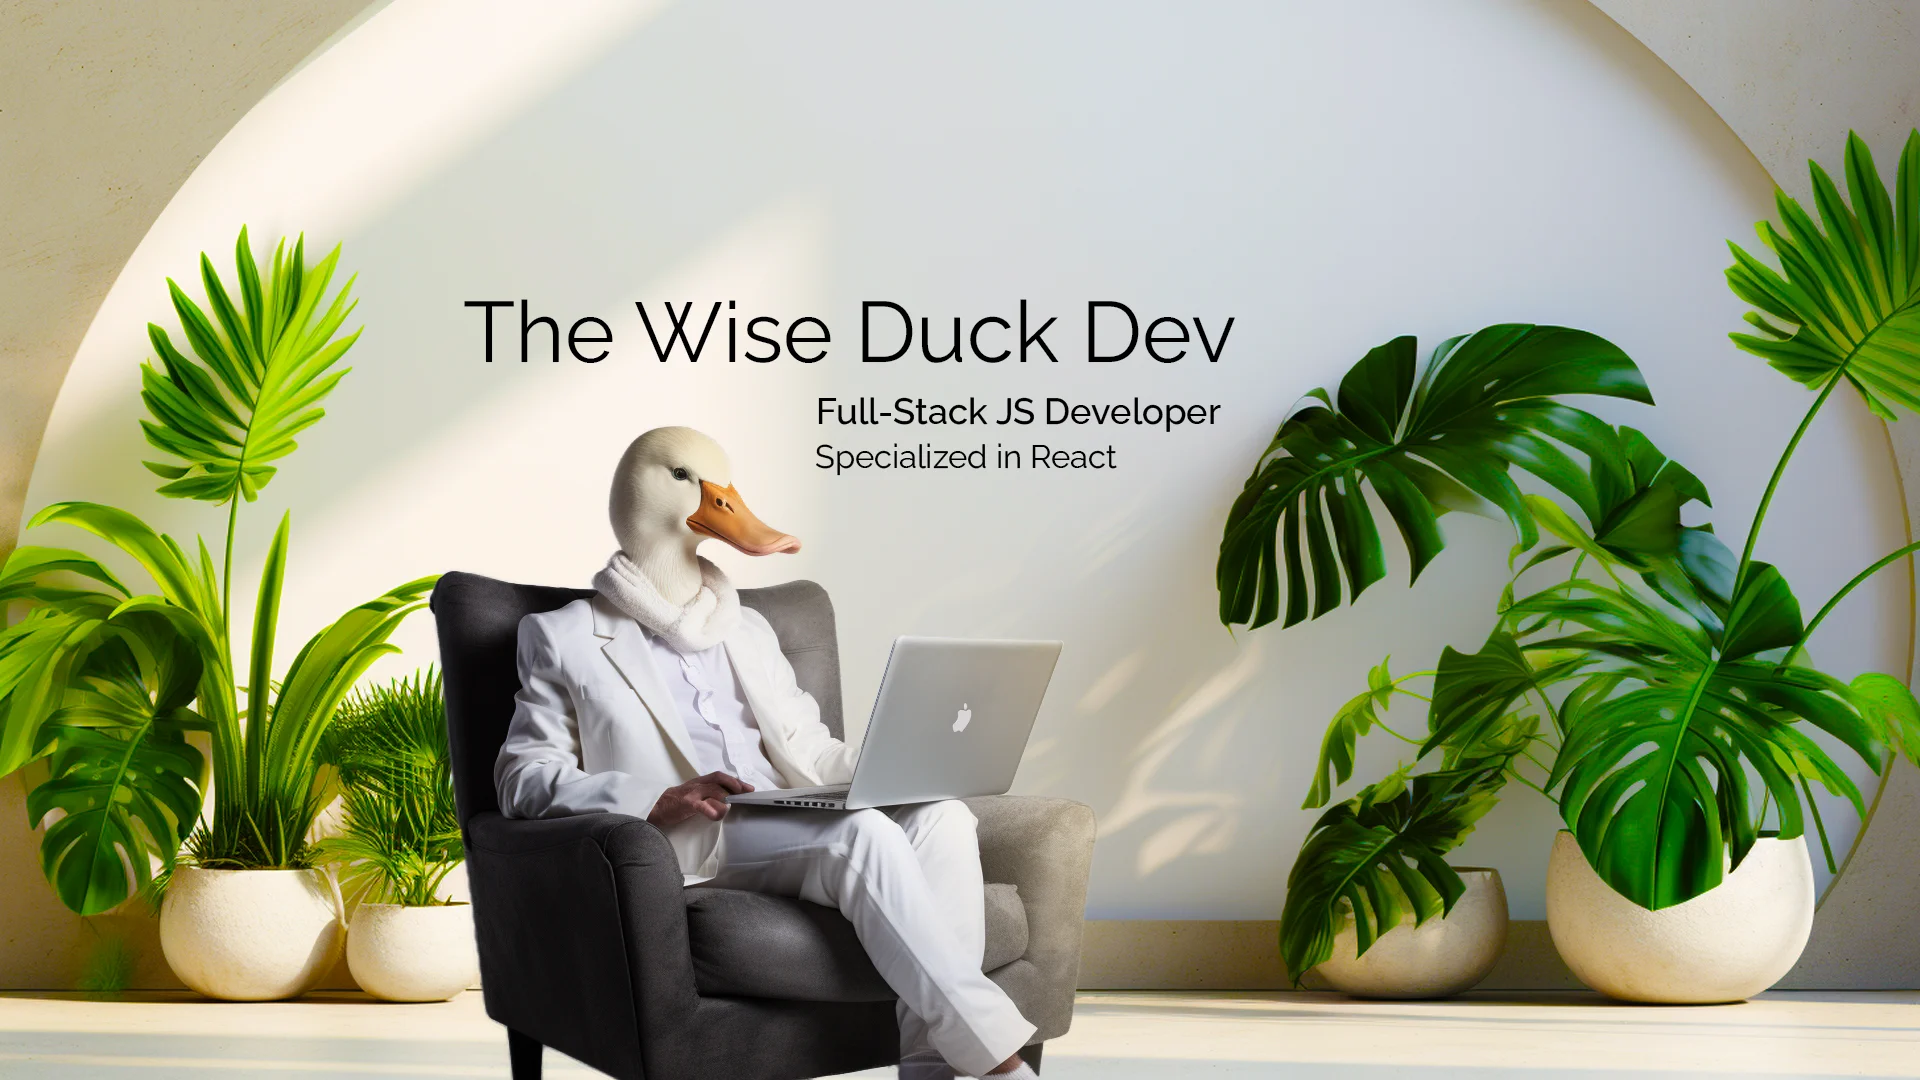 Certified Full Stack JavaScript Web and Web Mobile Developer Wise Duck Dev, specialized in React, coding on laptop in modern office setup with green plants